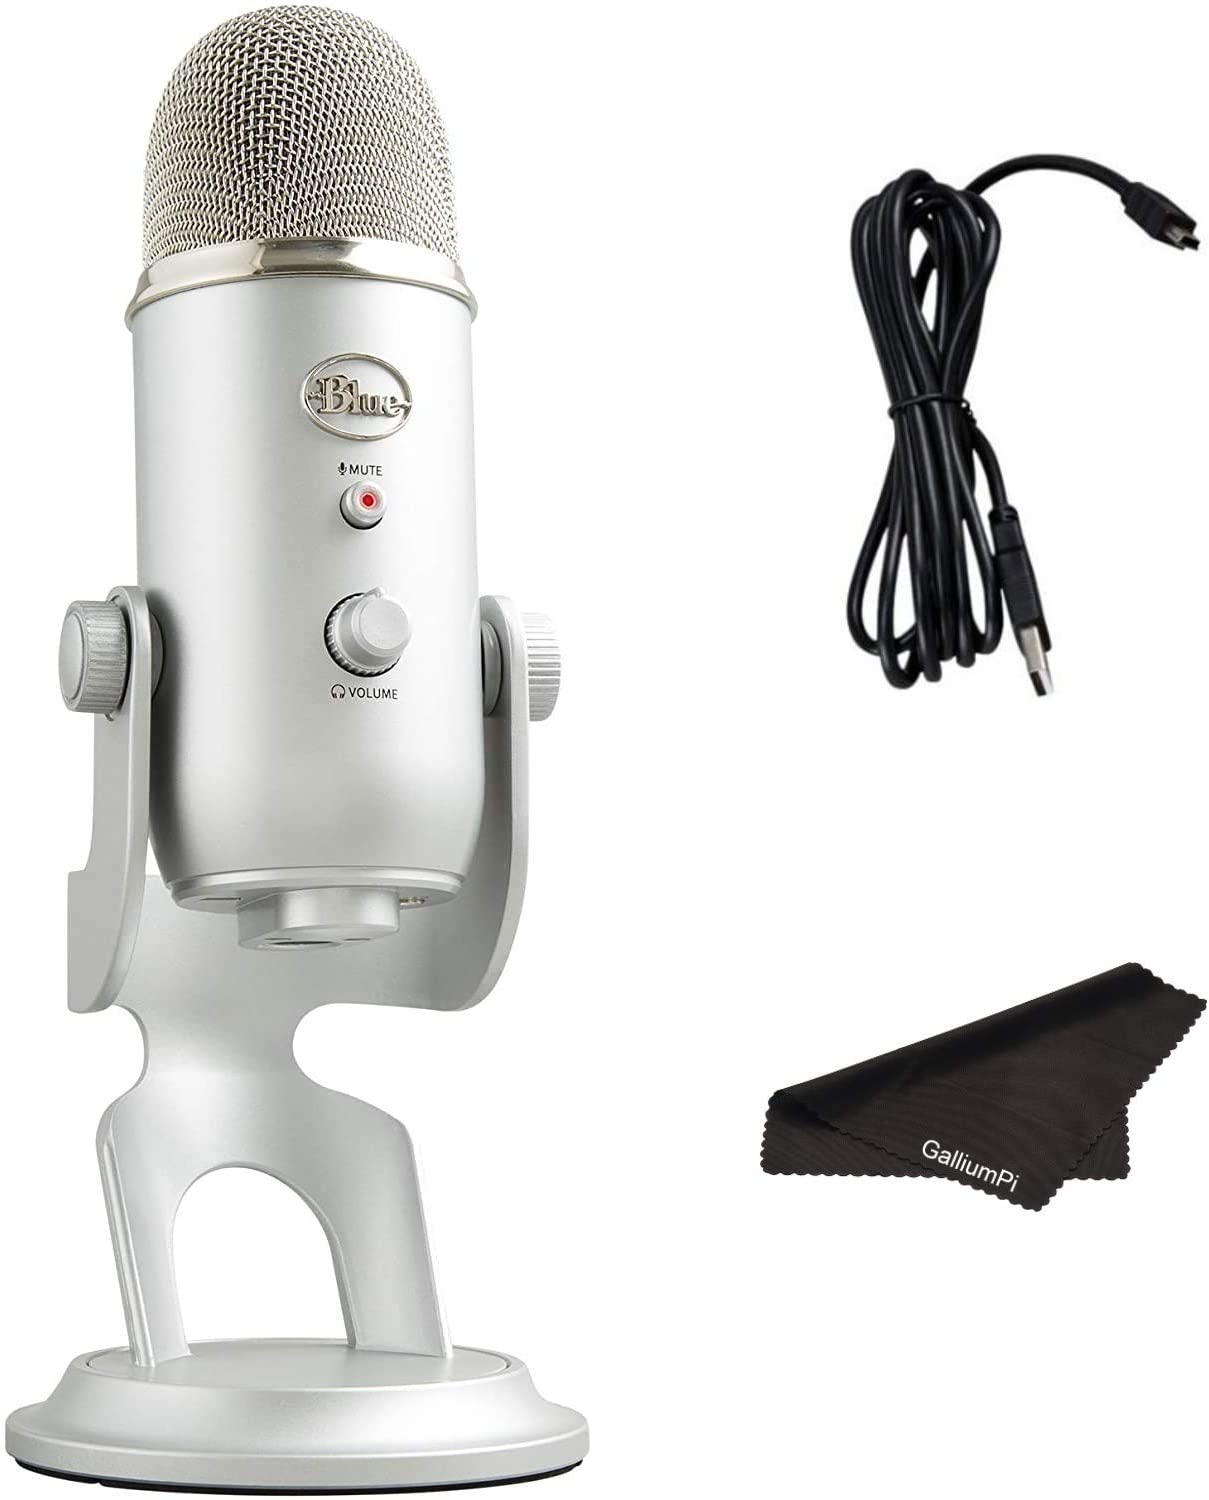 Newest Blue Yeti USB Microphone with 4 Pickup Patterns, 3 Condenser Capsules, Mic Gain Control & Adjustable Stand for Gaming, Streaming, Podcasting on PC & Mac with GalliumPi Accessories - Silver